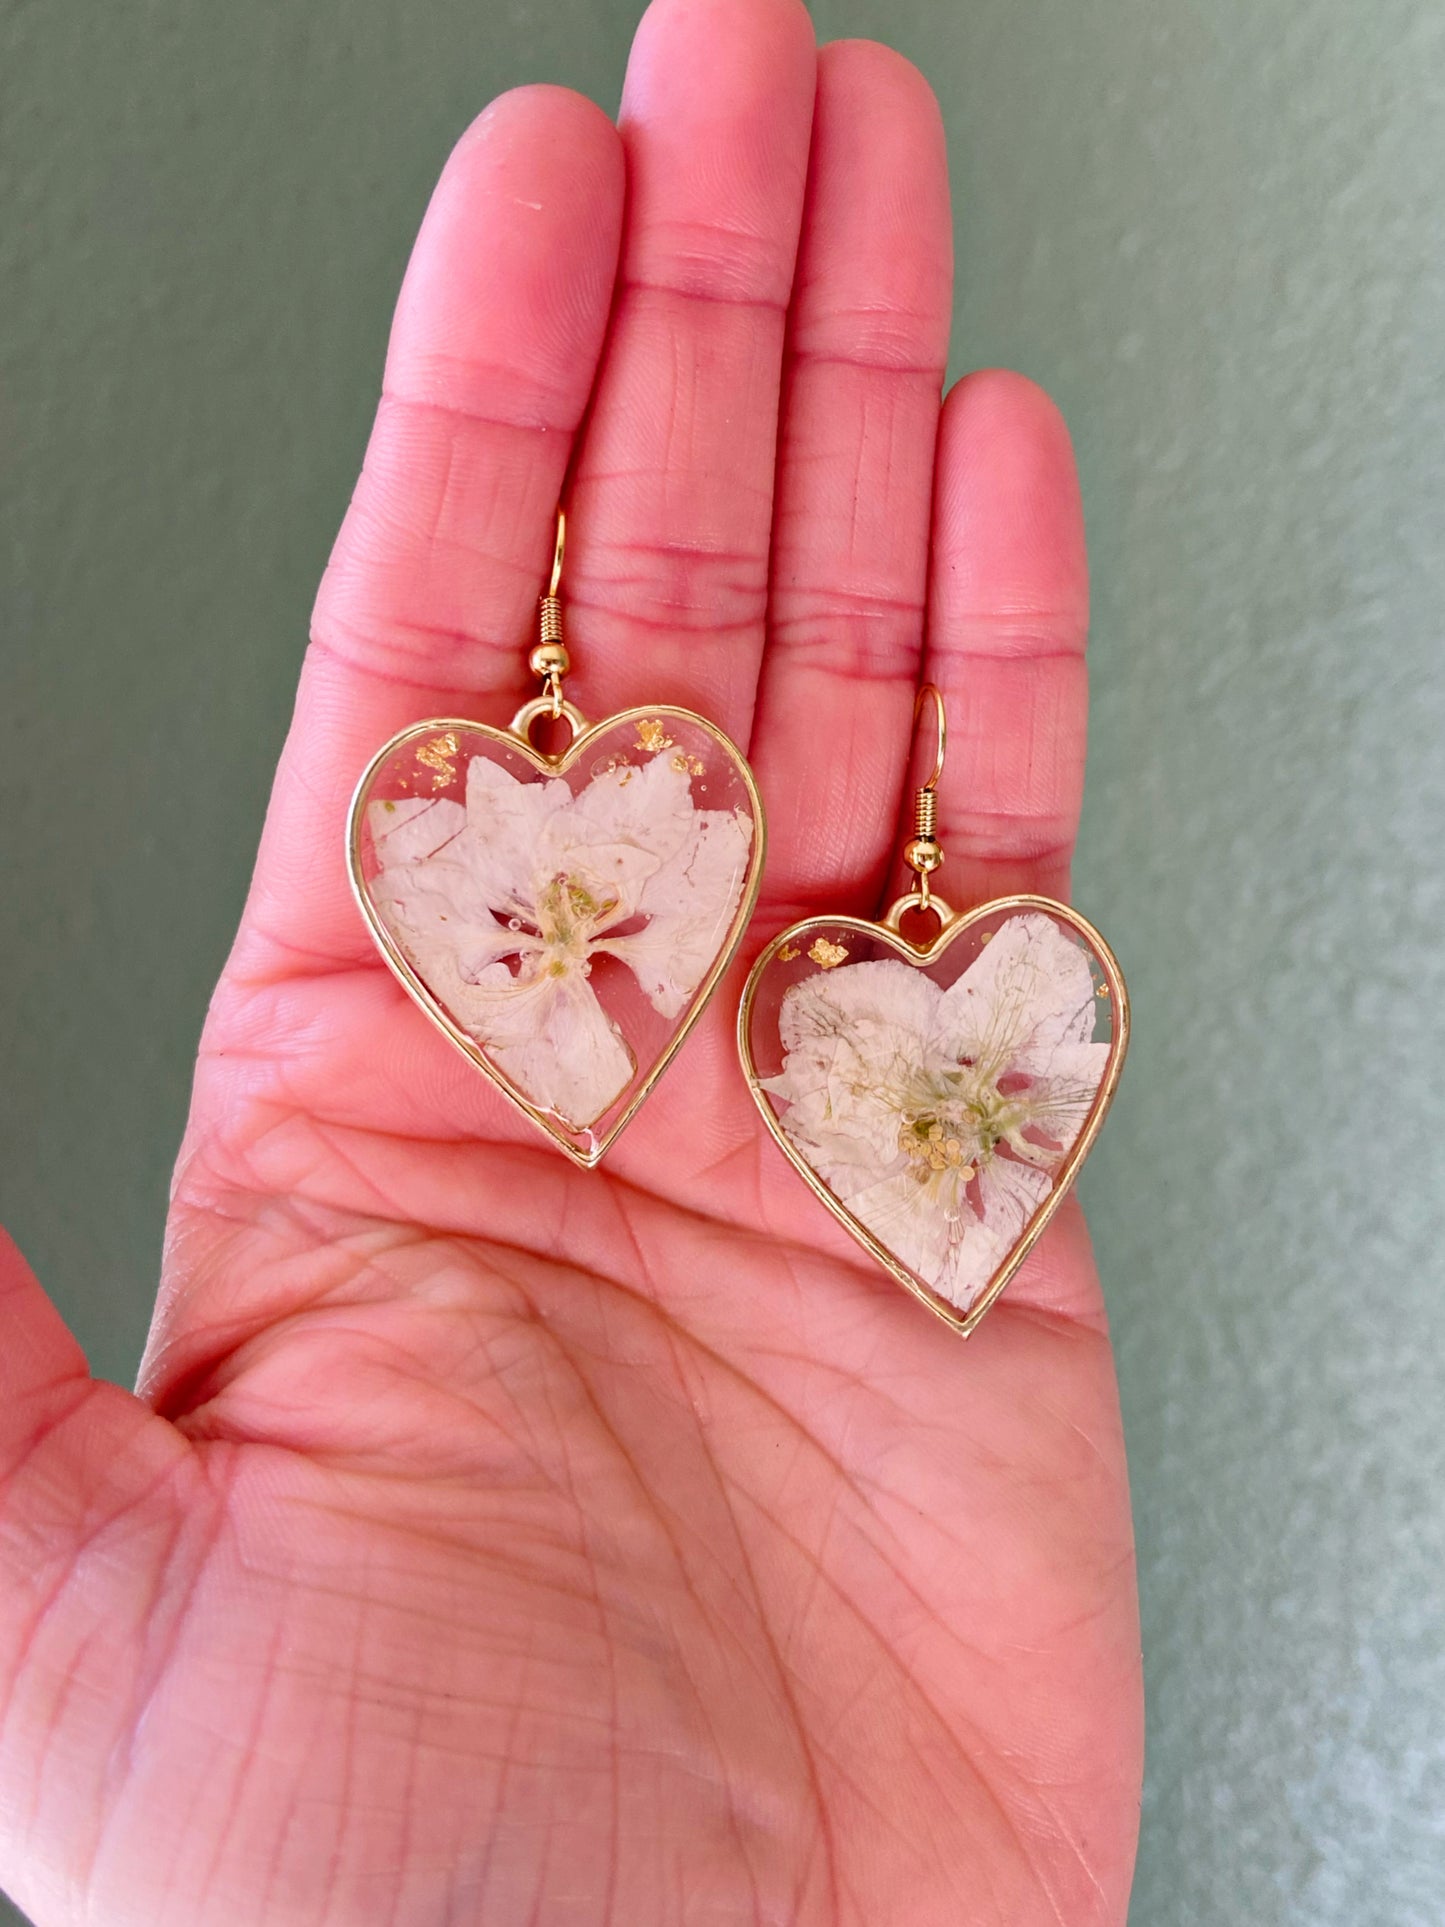 Larkspur- White pressed flowers and gold flake inside open gold heart earrings, preserved botanical jewelry